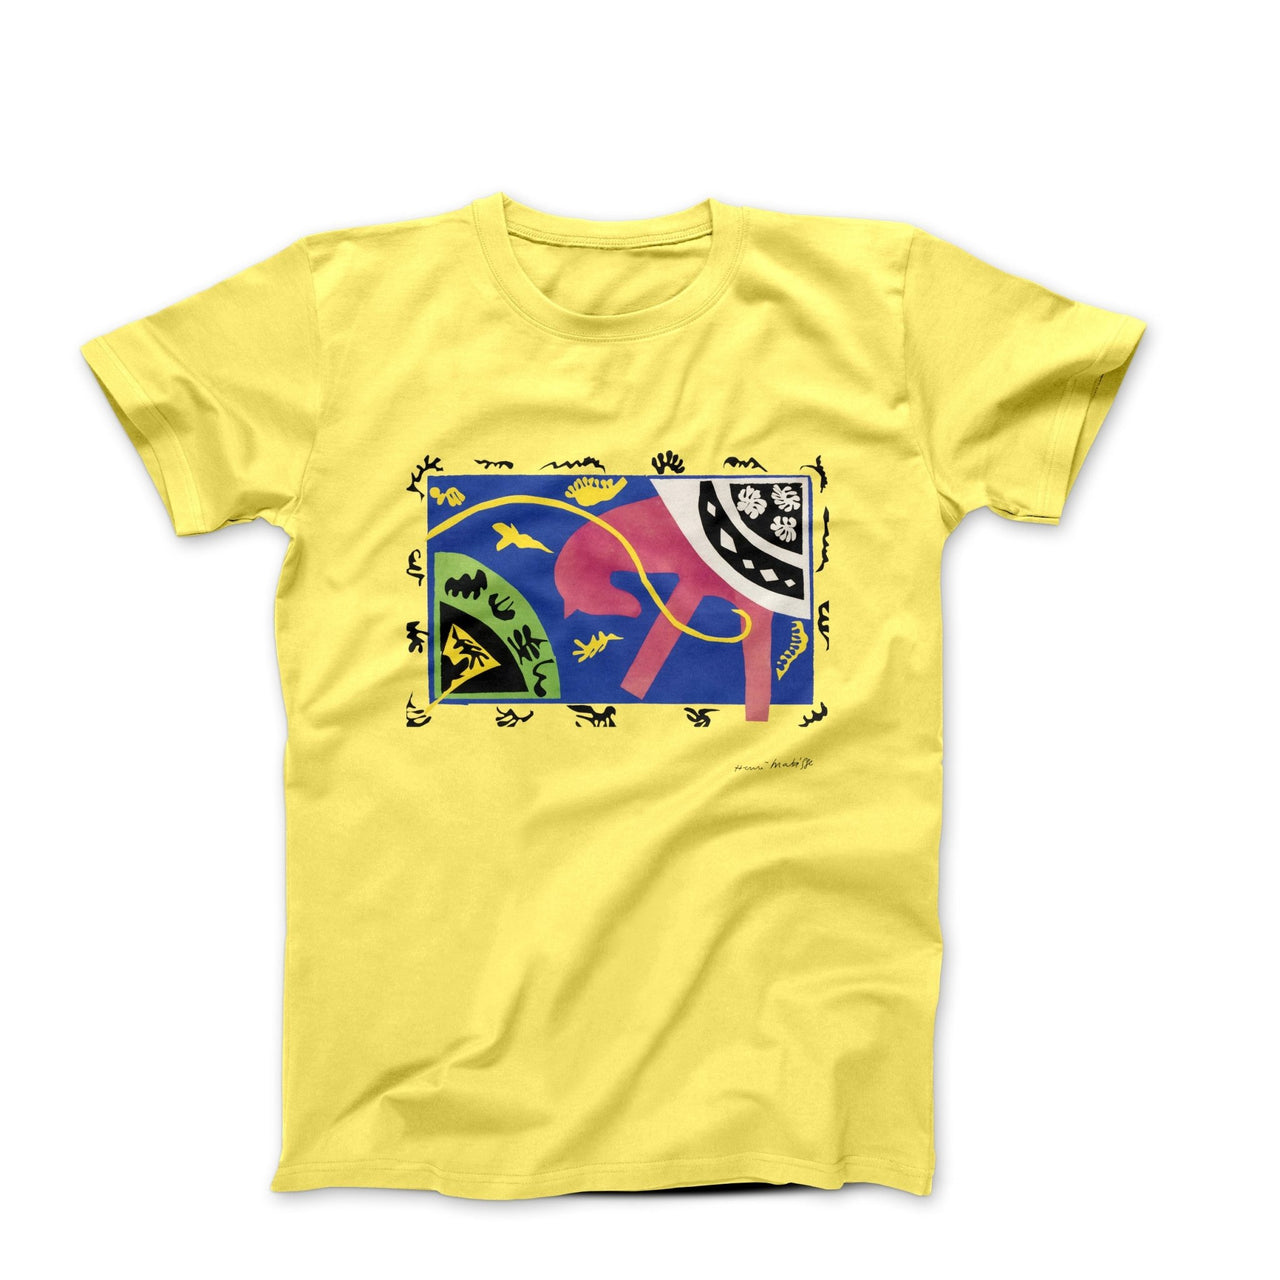 Henri Matisse The Horse, the Squire and the Clown (1947) Artwork T-shirt - Clothing - Harvey Ltd